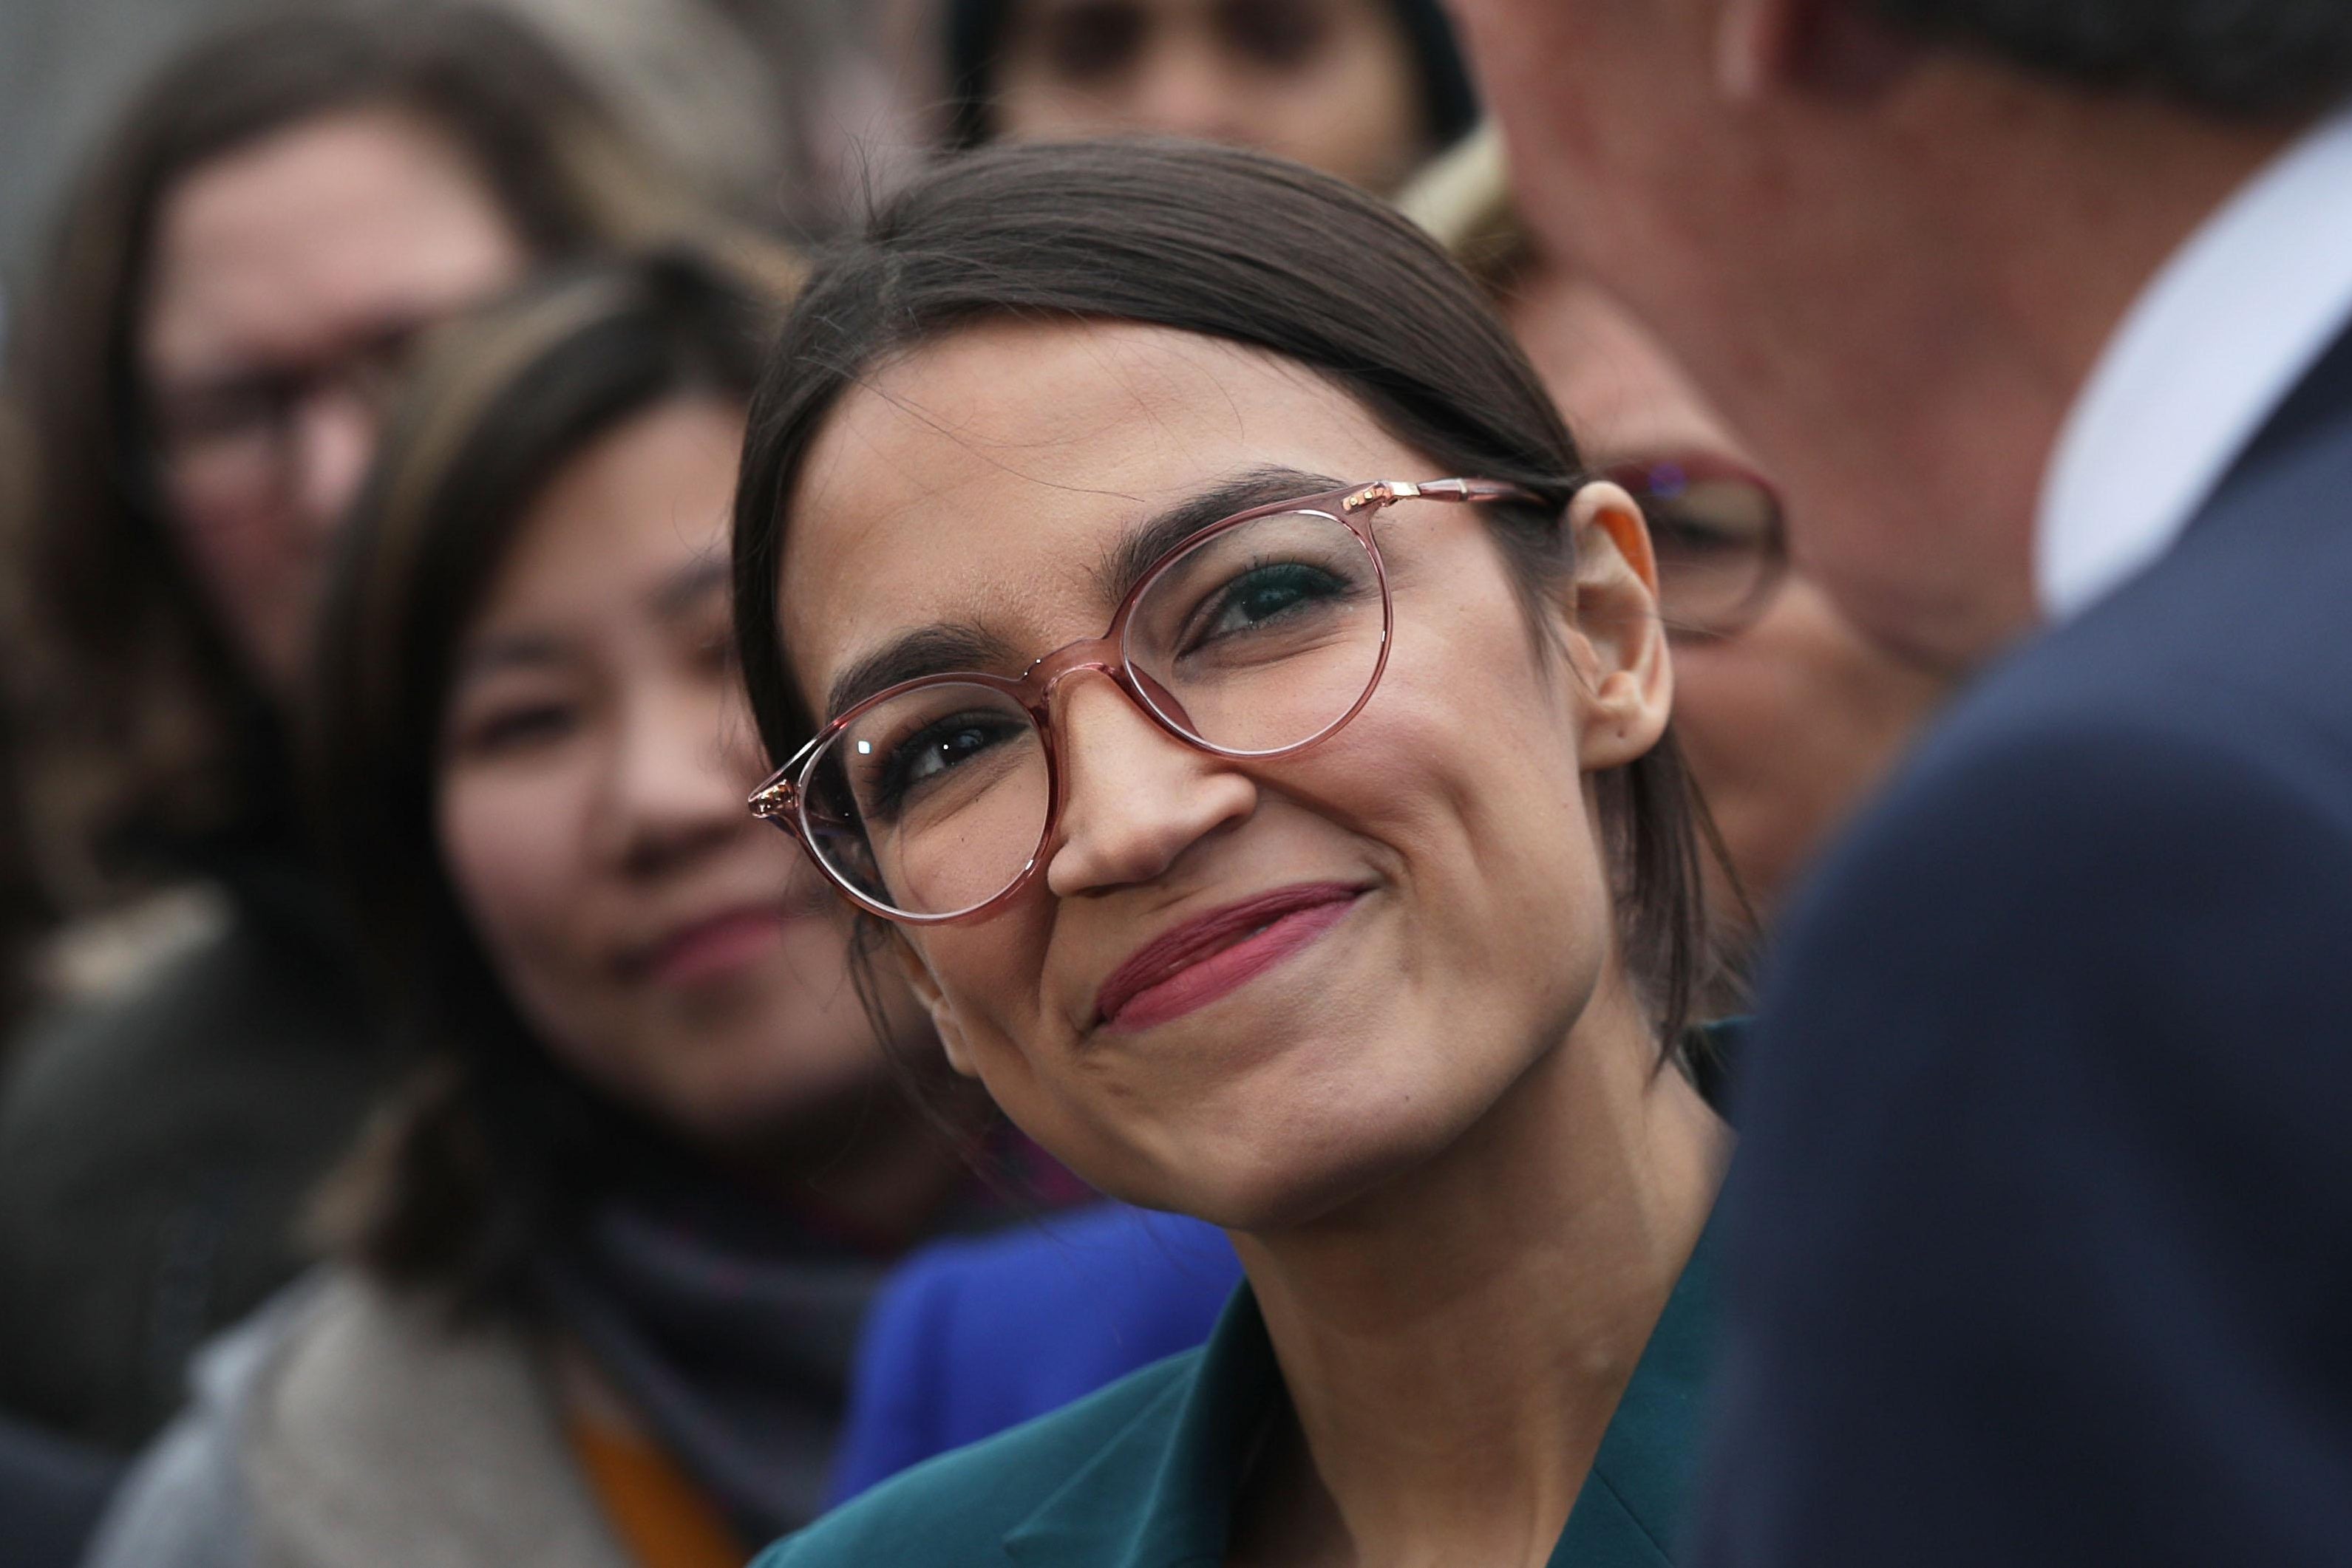 Rep. Alexandria Ocasio-Cortez smiles at her Green New Deal co-author Sen. Ed Markey during a Capitol Hill news conference.